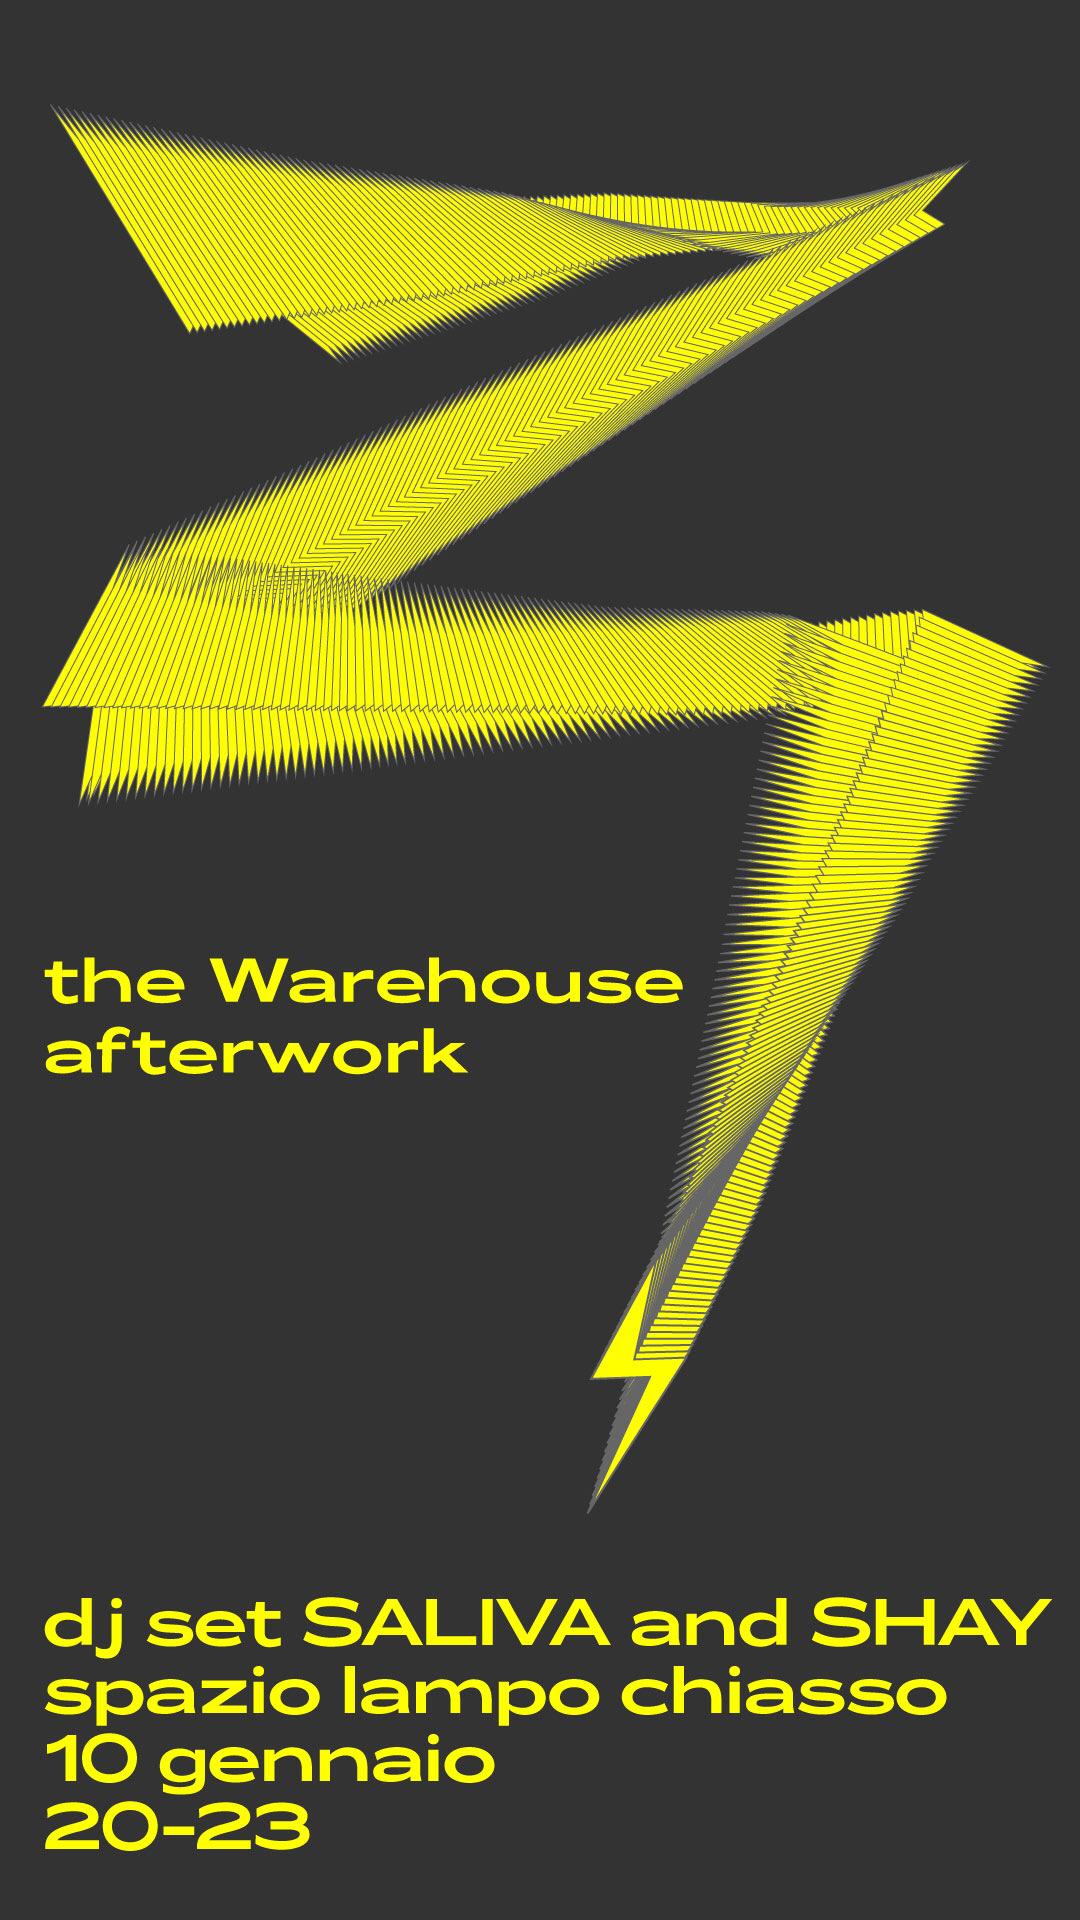 The Warehouse - Afterwork